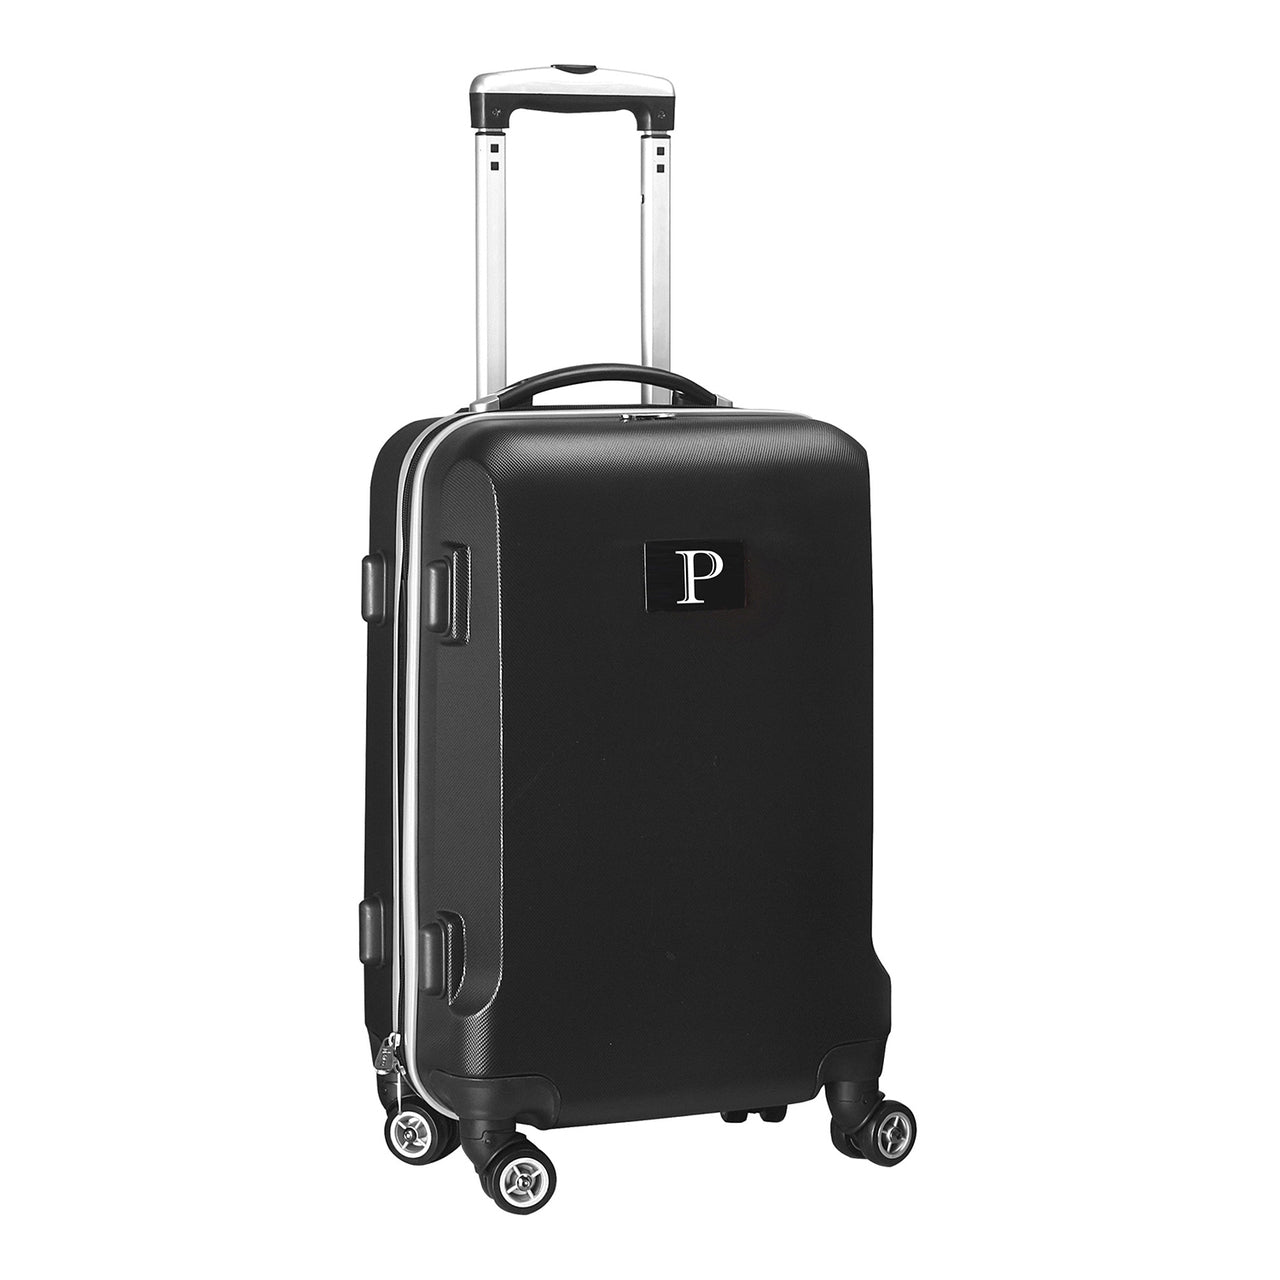 Personalized Initial Name letter "P" 20 inches Carry on Hardcase Spinner Luggage by Mojo in BLACK